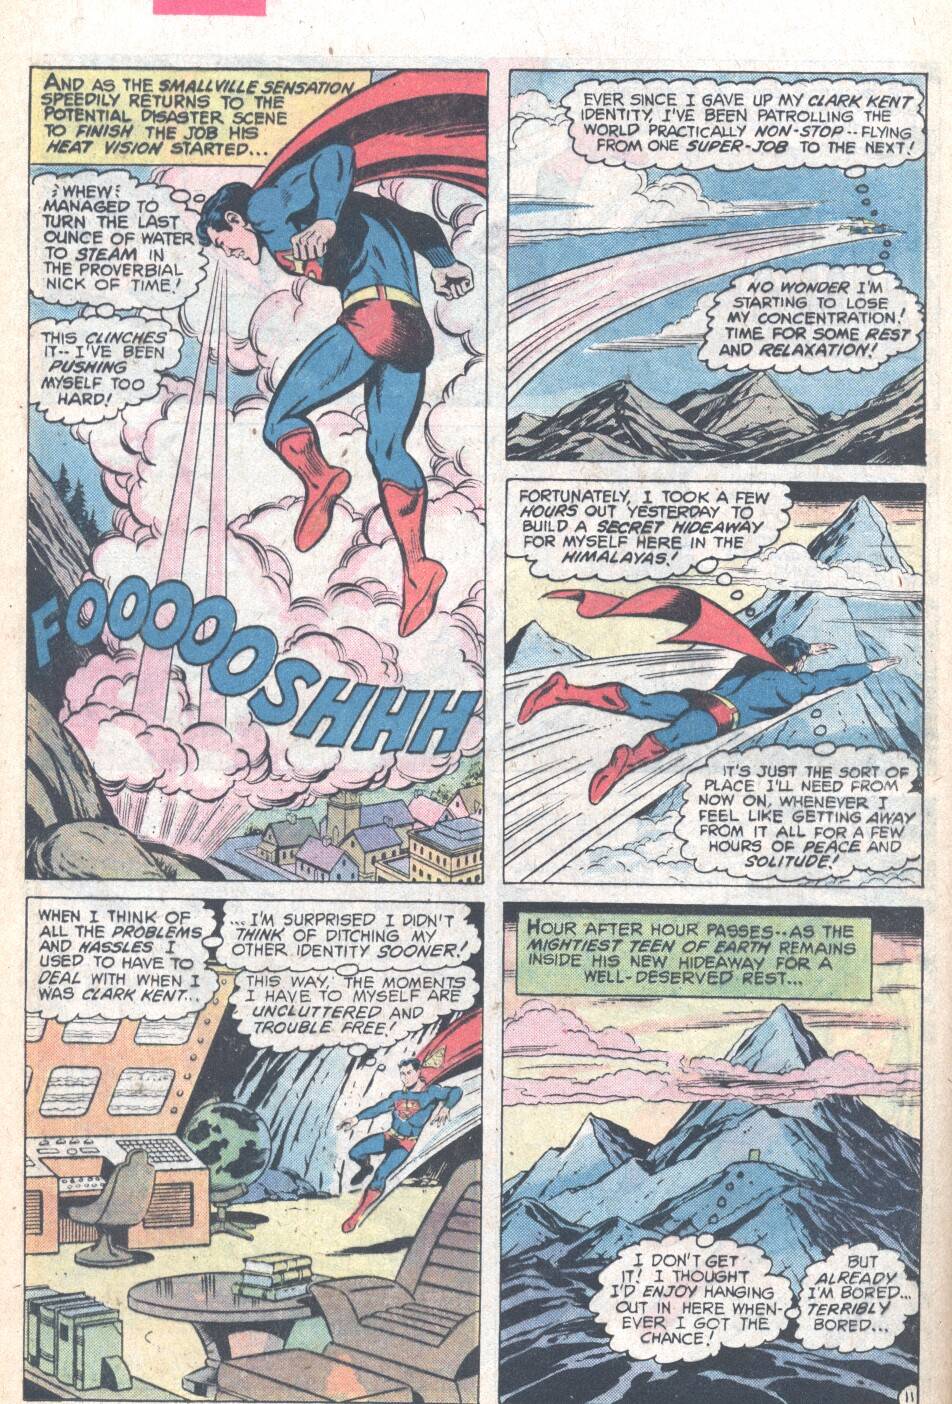 The New Adventures of Superboy 9 Page 11